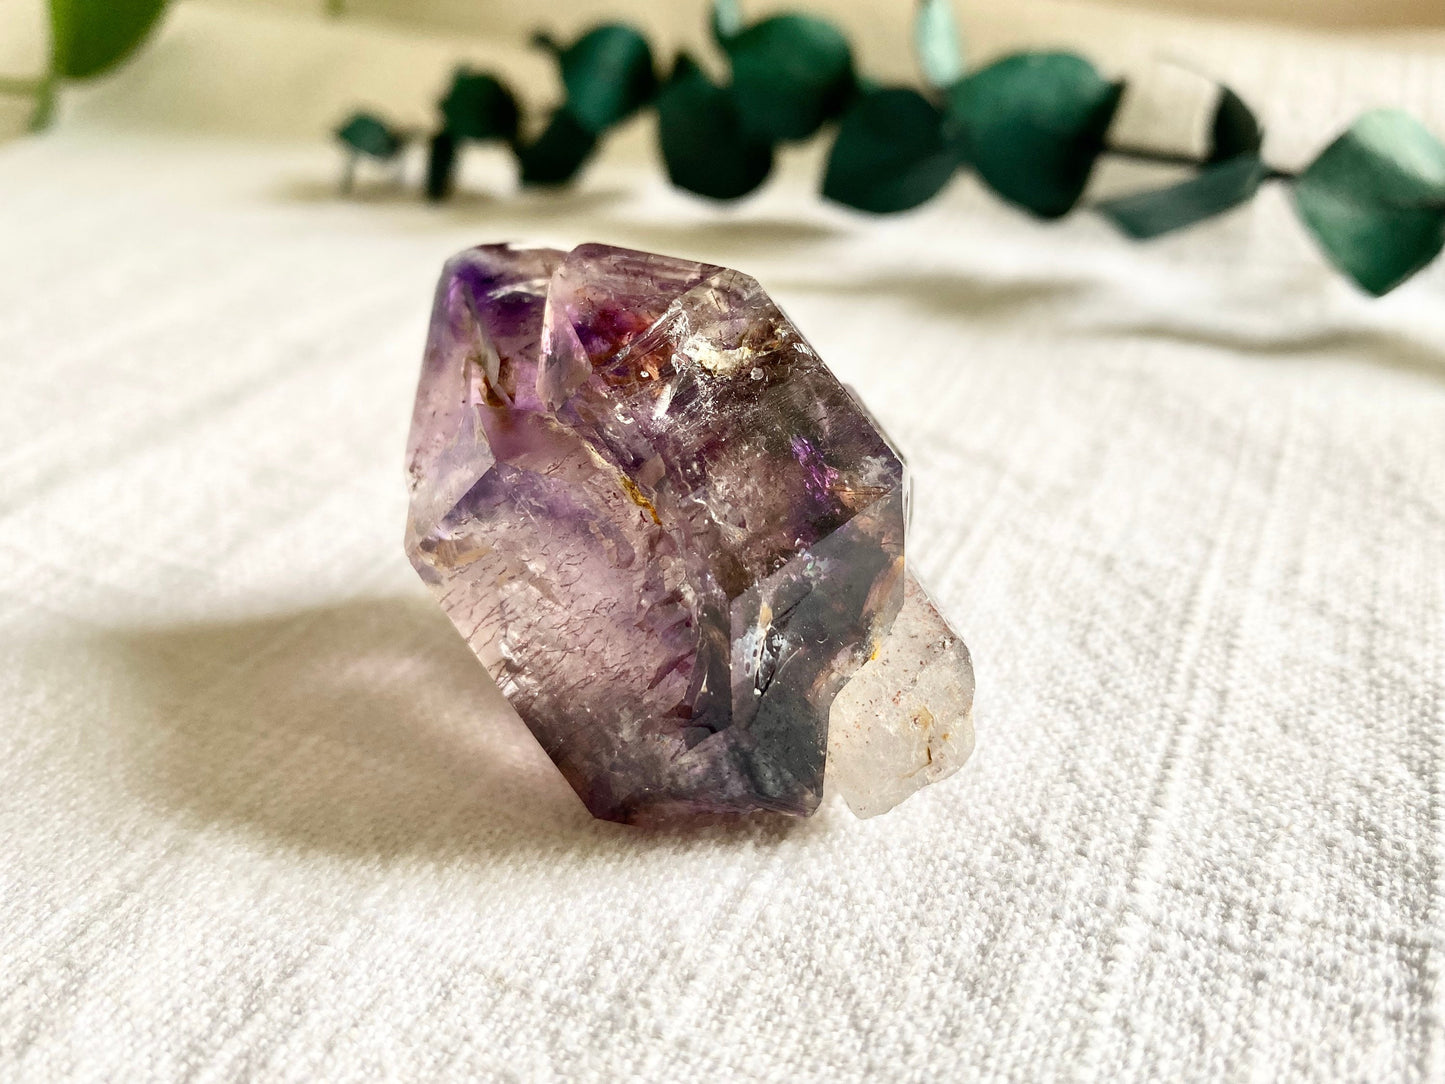 Elestial Shangaan Amethyst Crystal ~ Deep Amethyst with Harlequin Red Hematite inclusions  - Double Terminated Elestial Scepter - Rock Shop